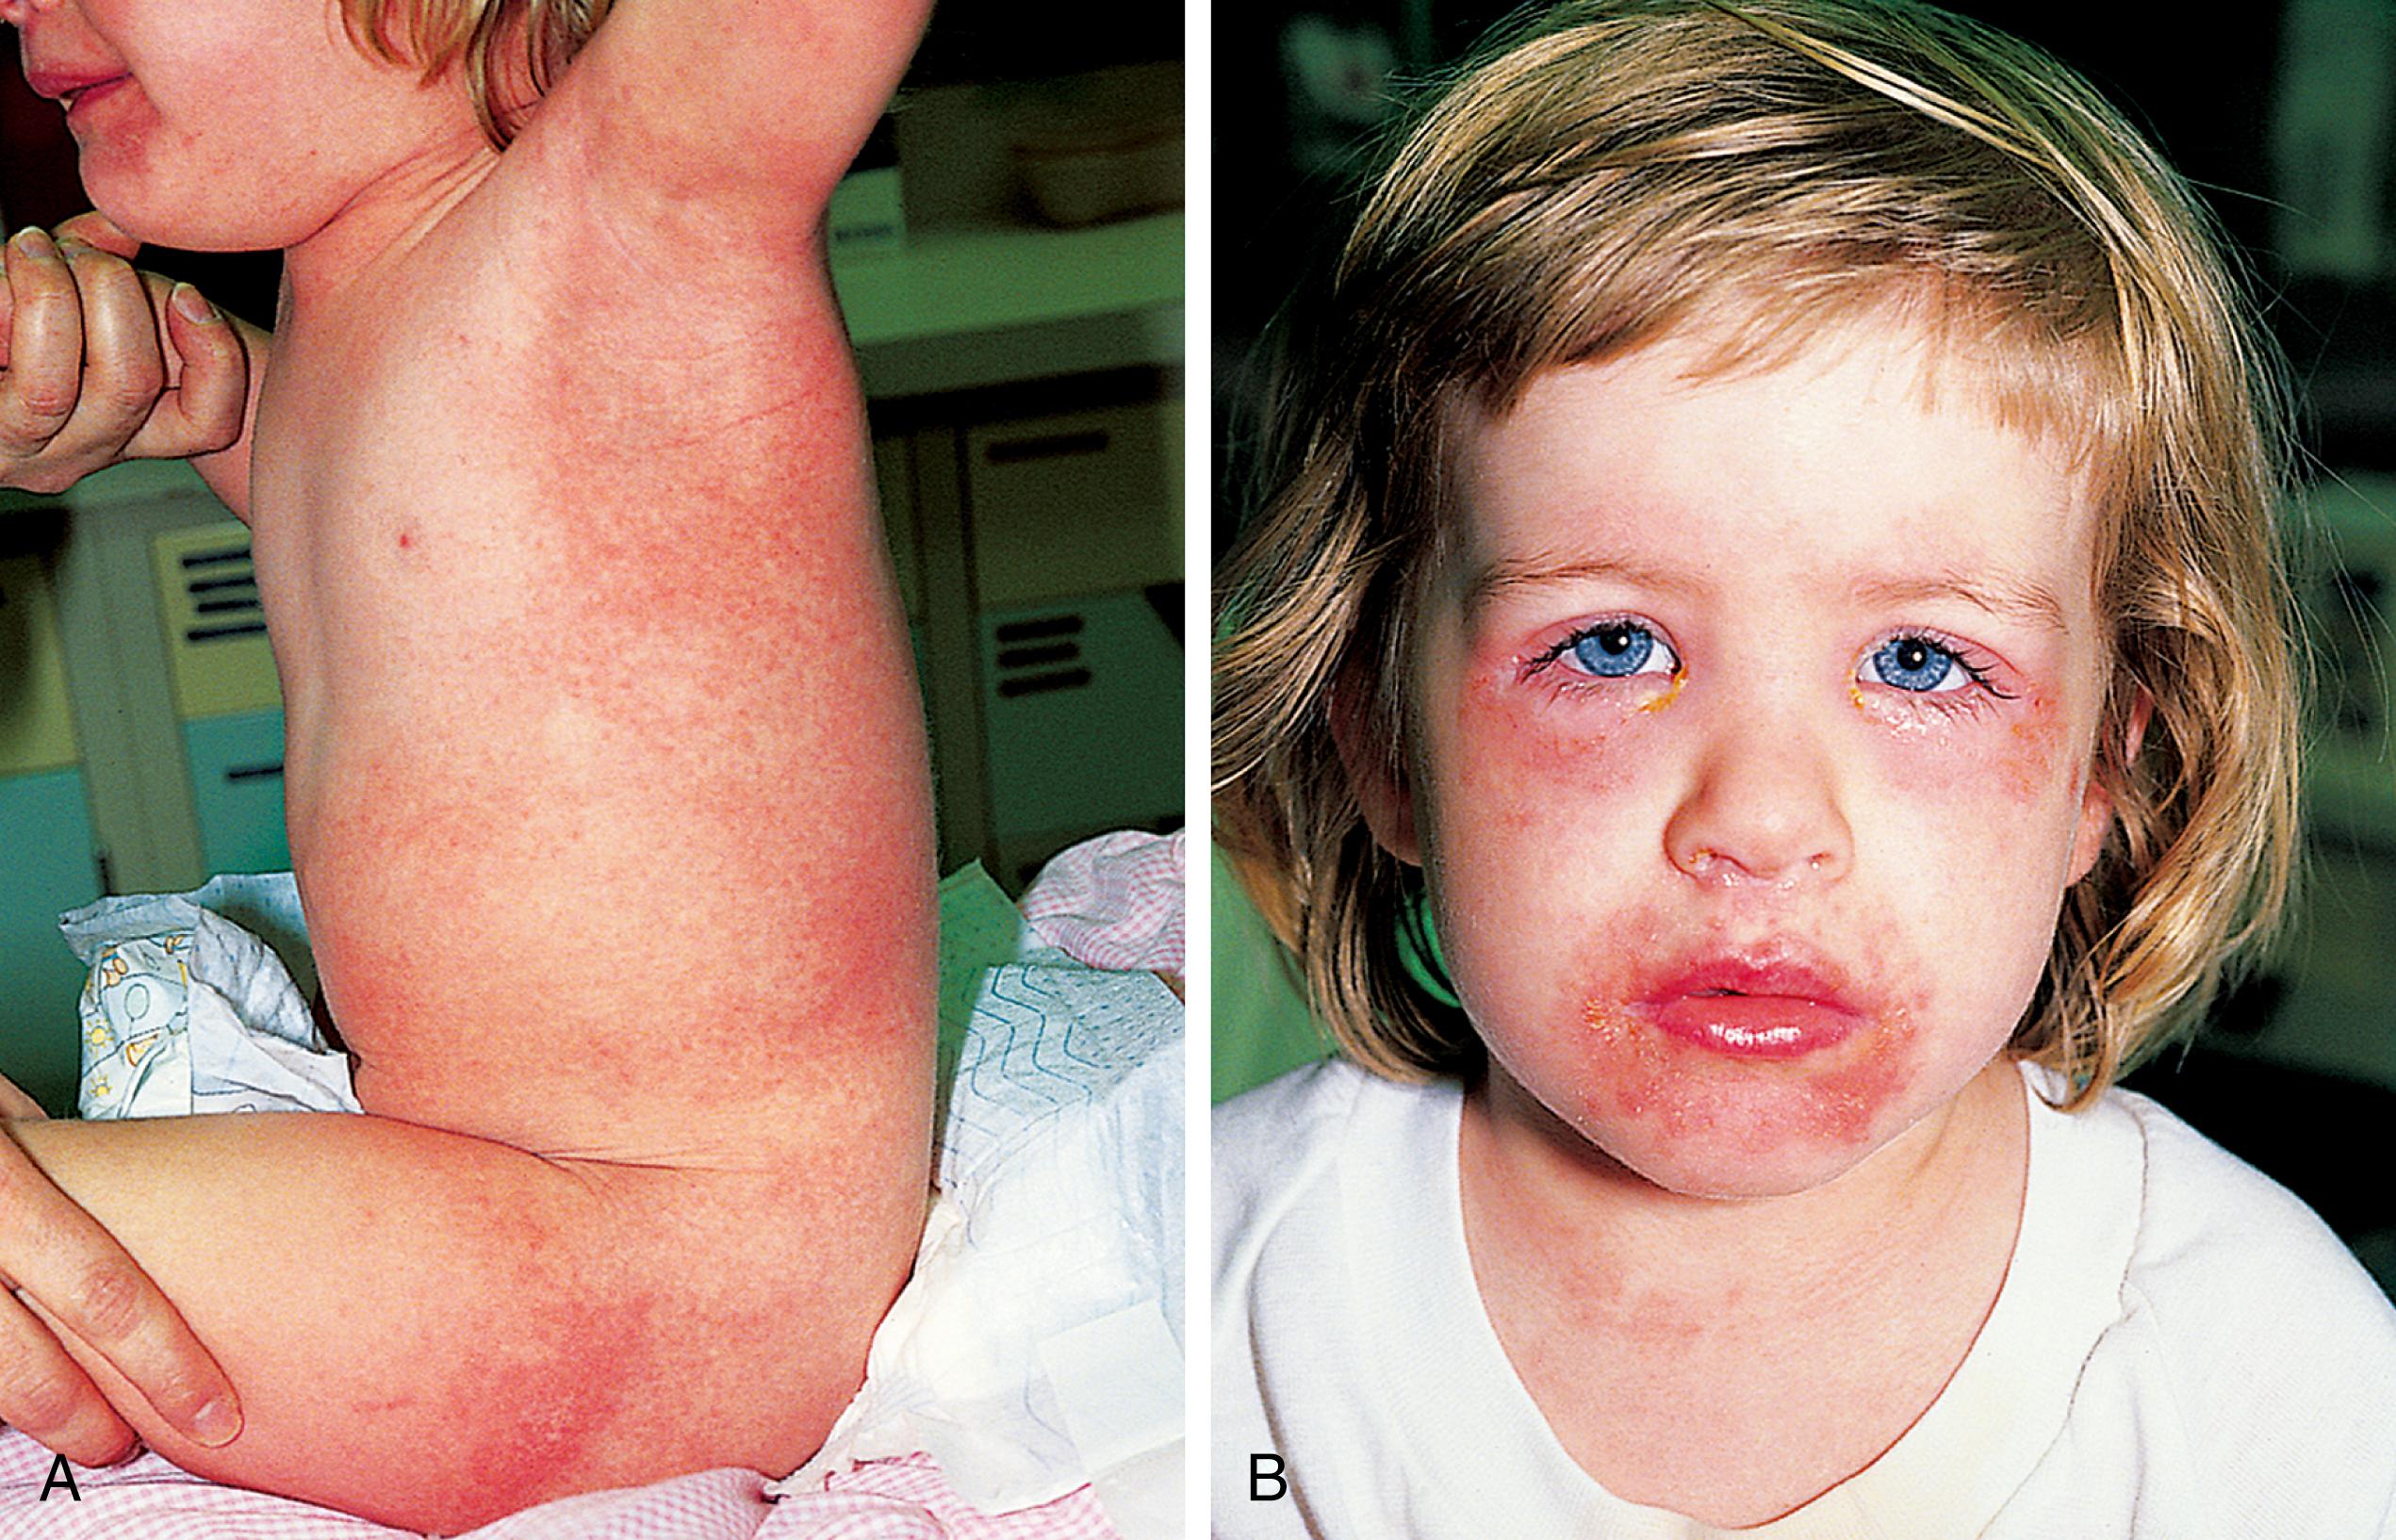 Fig. 13.19, Staphylococcal scarlet fever. (A) In this patient, nasopharyngitis and purulent conjunctivitis antedated the development of a generalized sandpaper-like rash, which was tender to the touch. (B) The skin in the periorbital and perioral areas has begun to crack, fissure, and weep serous fluid.